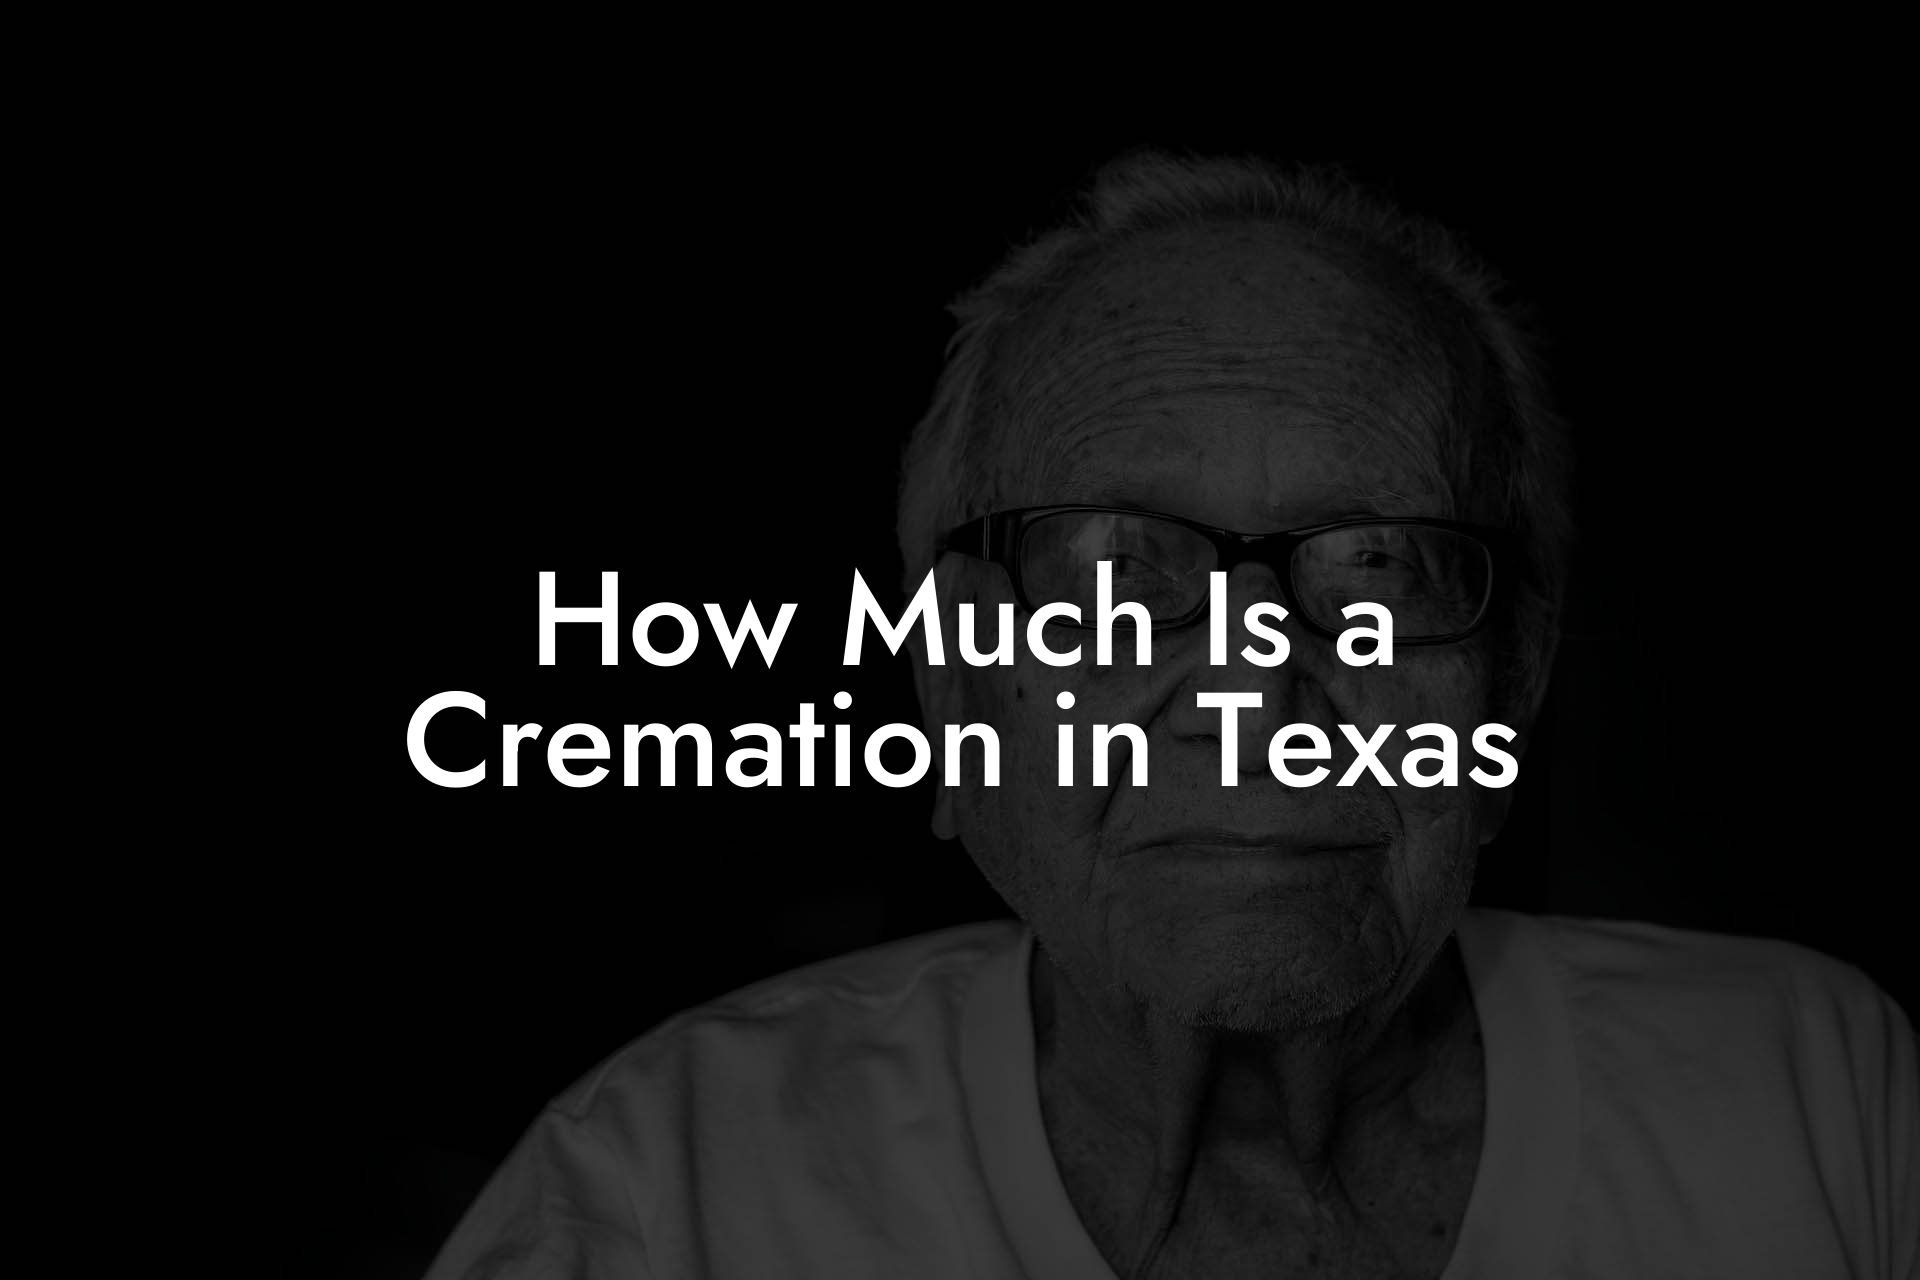 How Much Is a Cremation in Texas